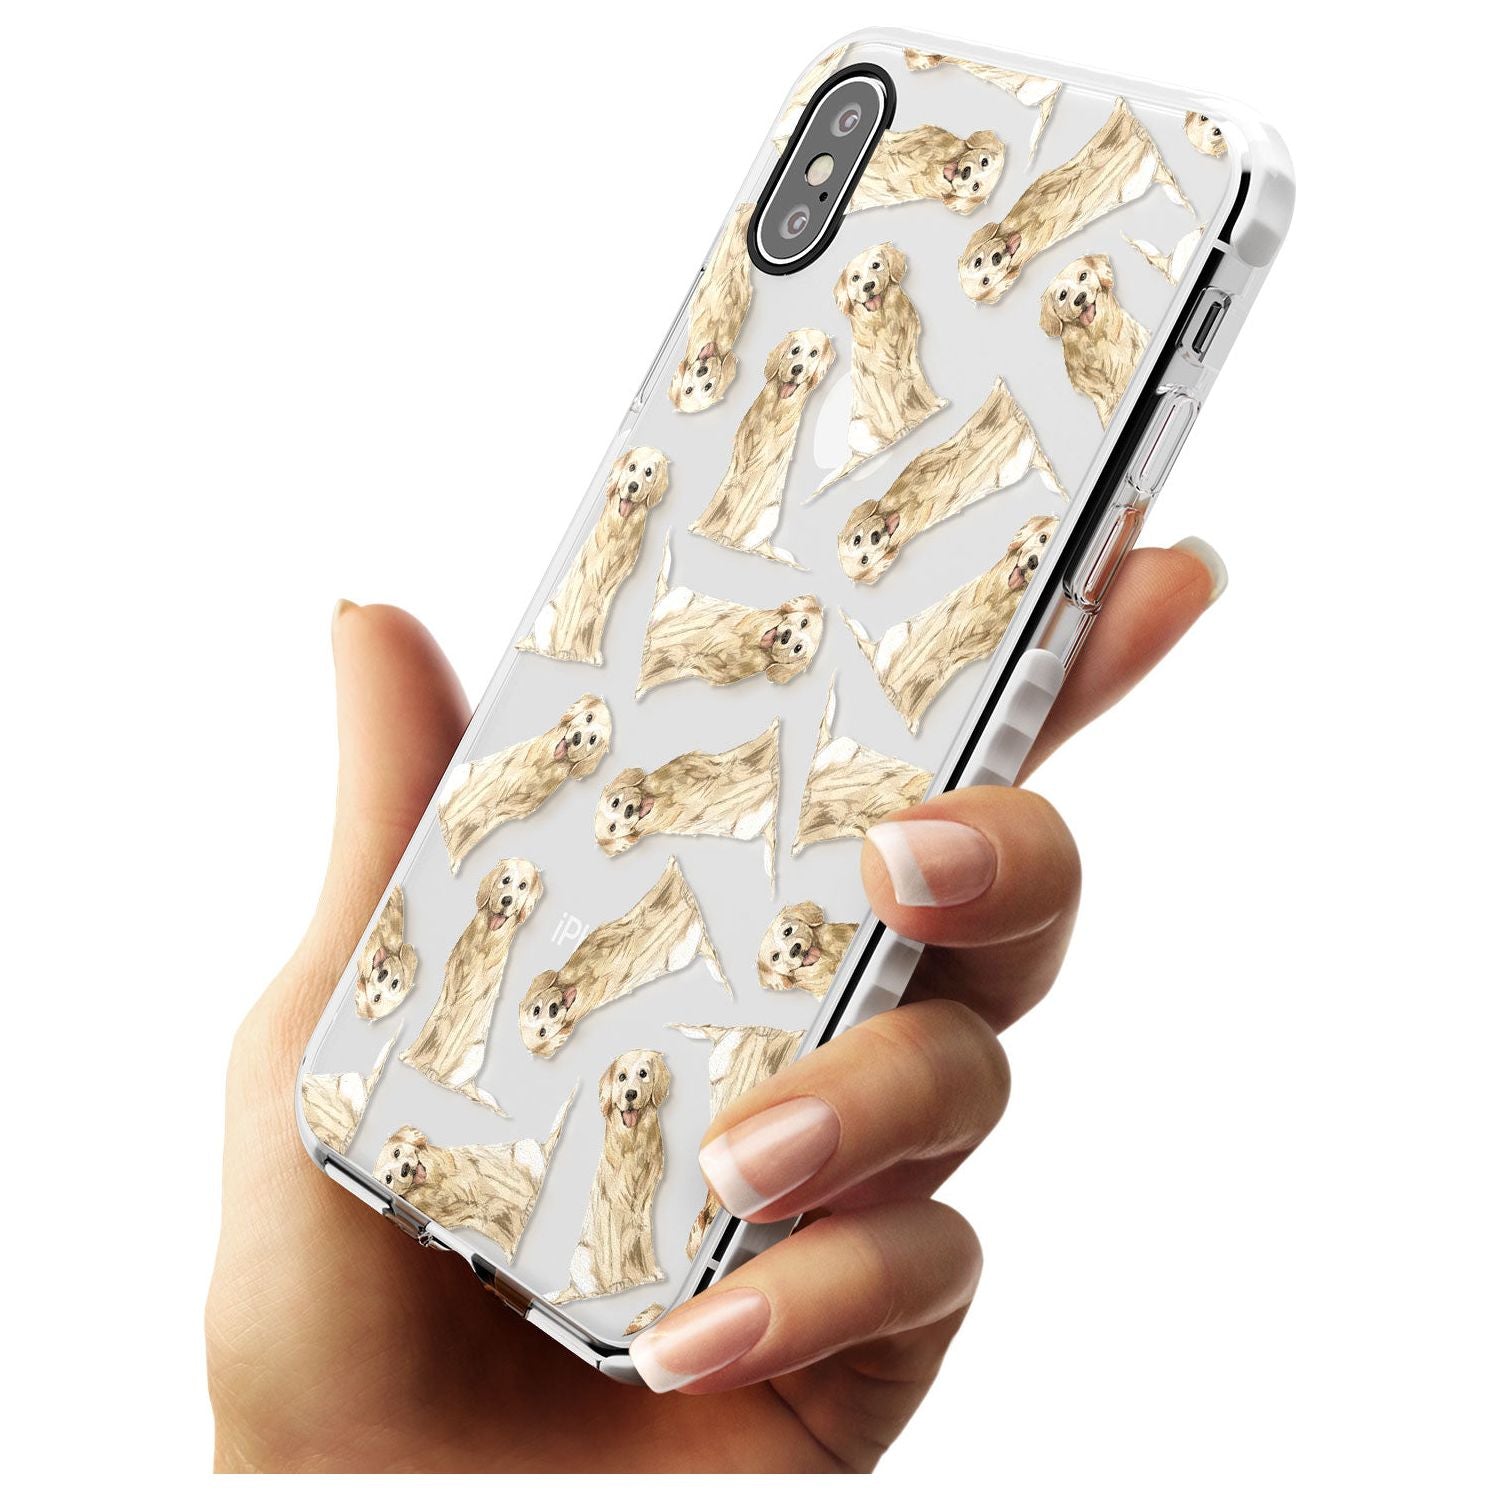 Golden Retriever Watercolour Dog Pattern Impact Phone Case for iPhone X XS Max XR